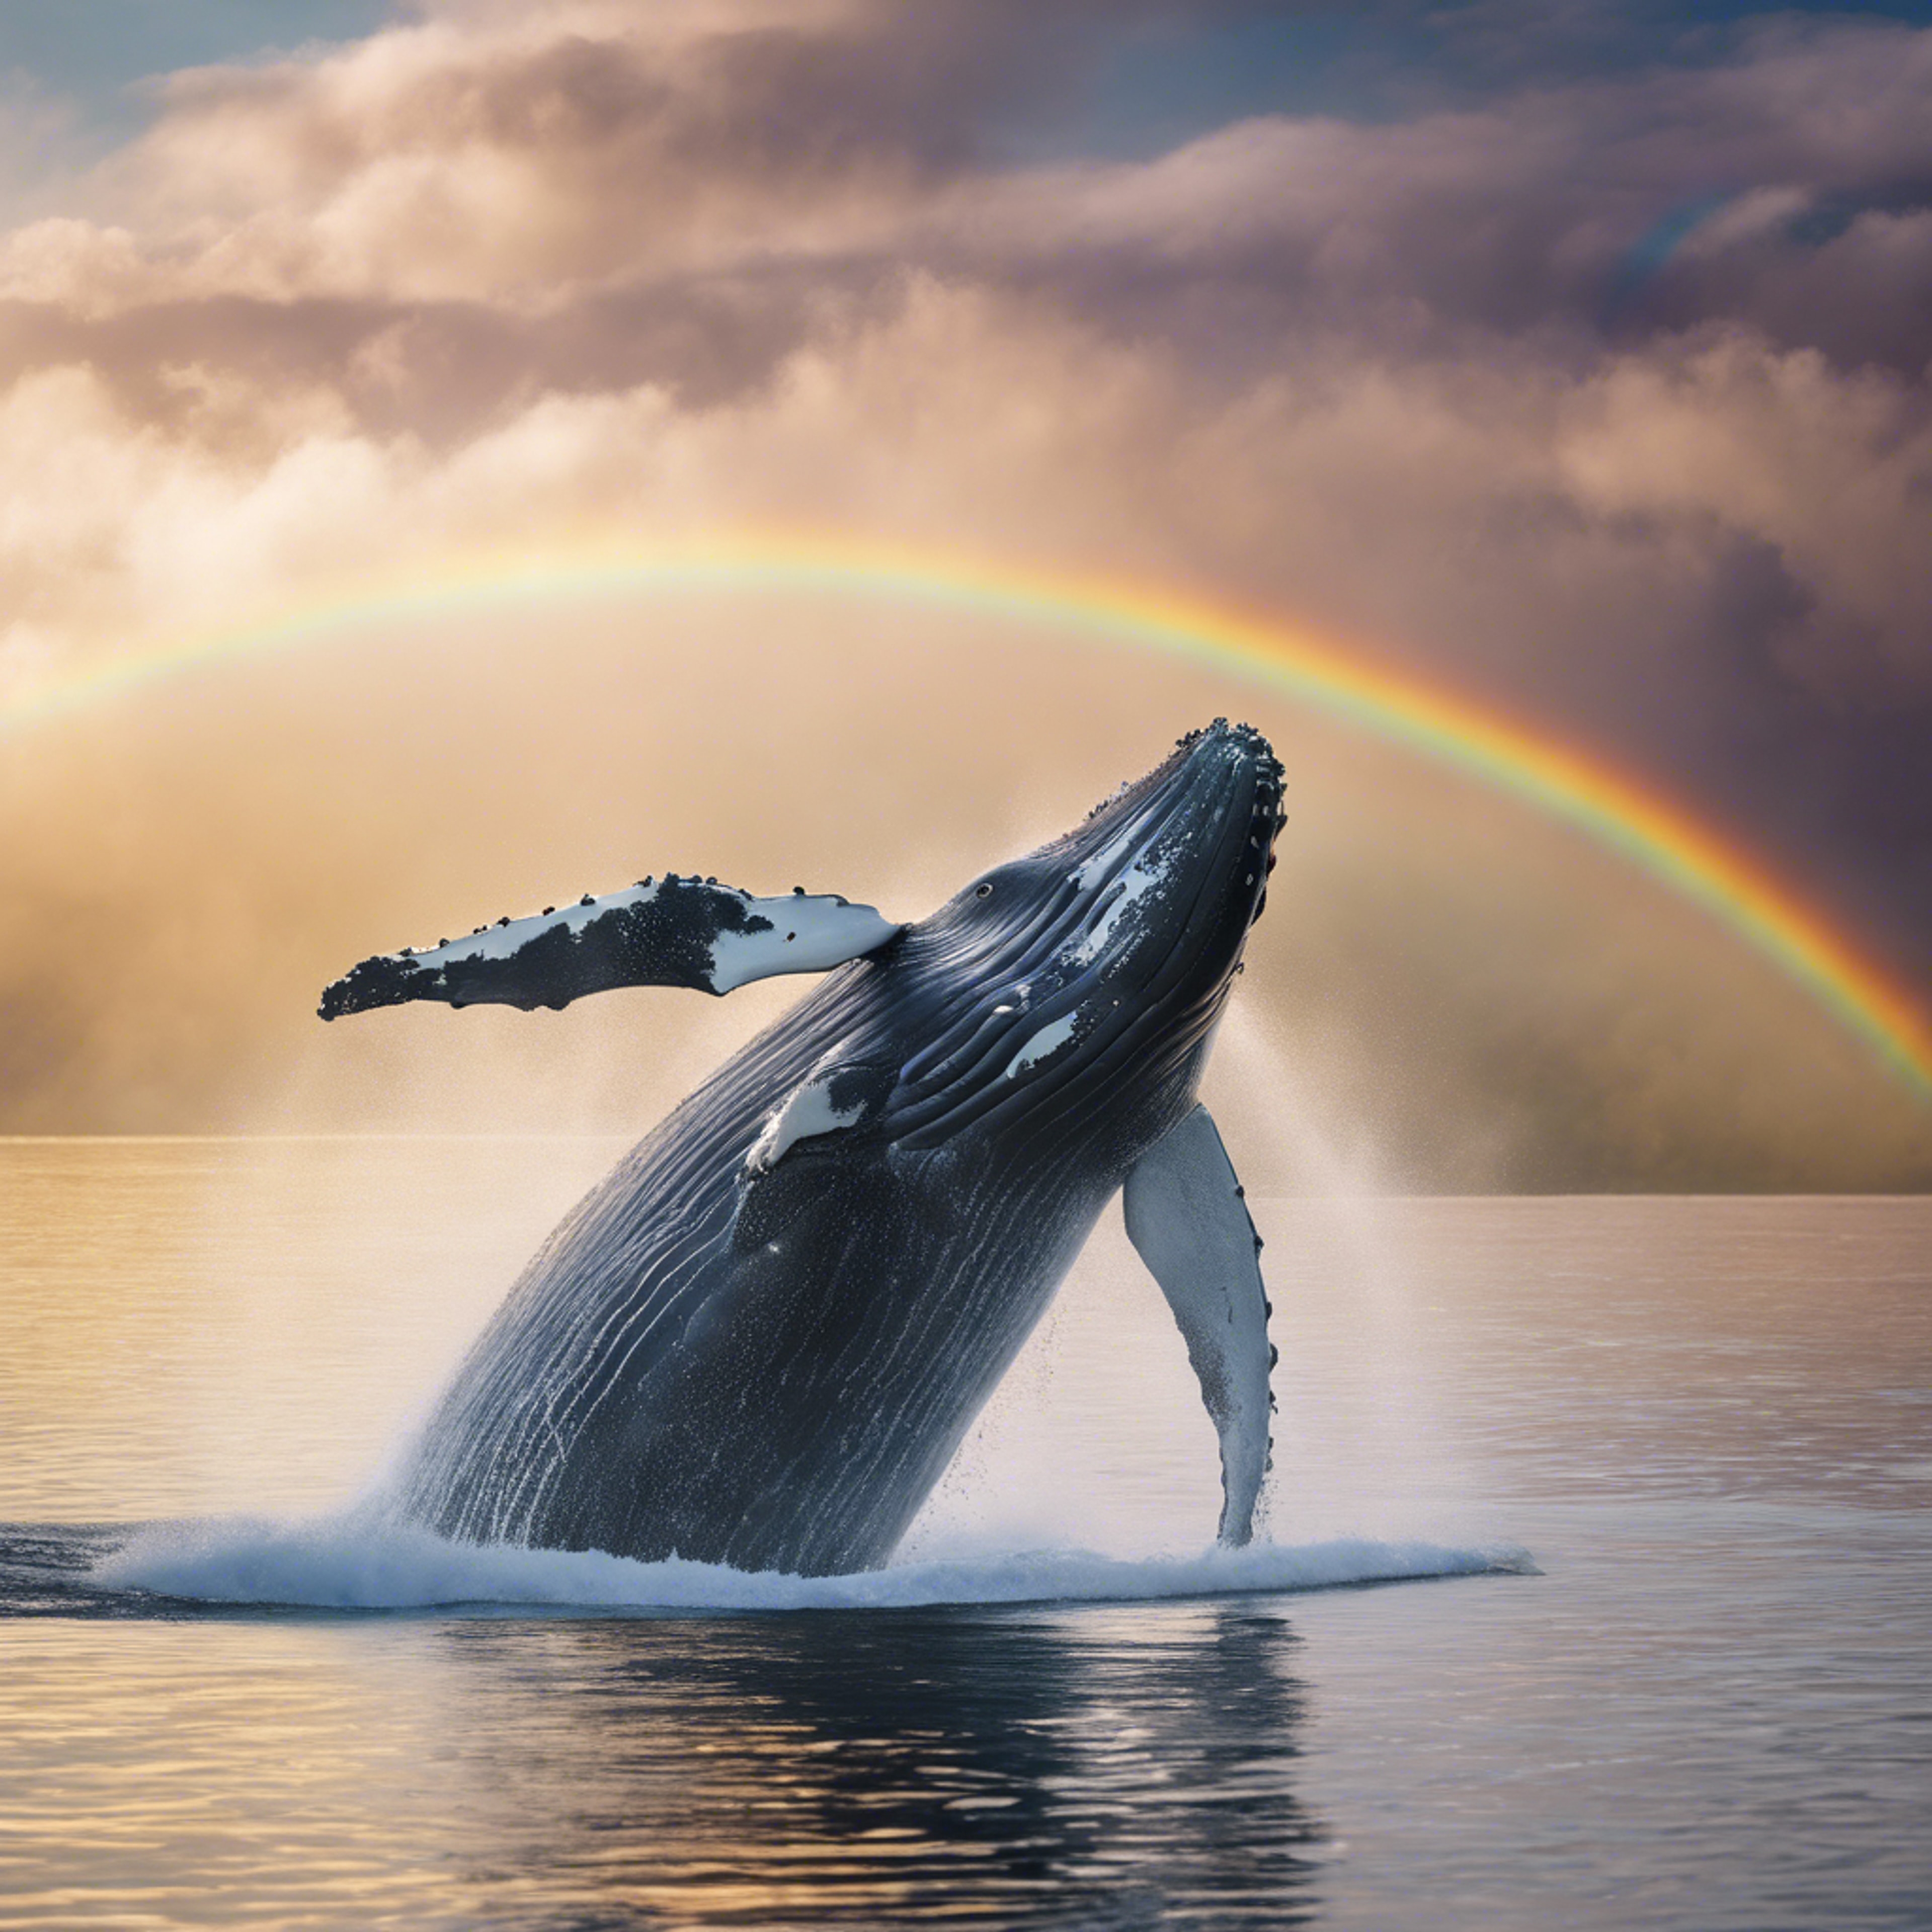 A humpback whale breaching the sea surface with a rainbow forming in the mist. Wallpaper[0b82514e67944ad3ba61]